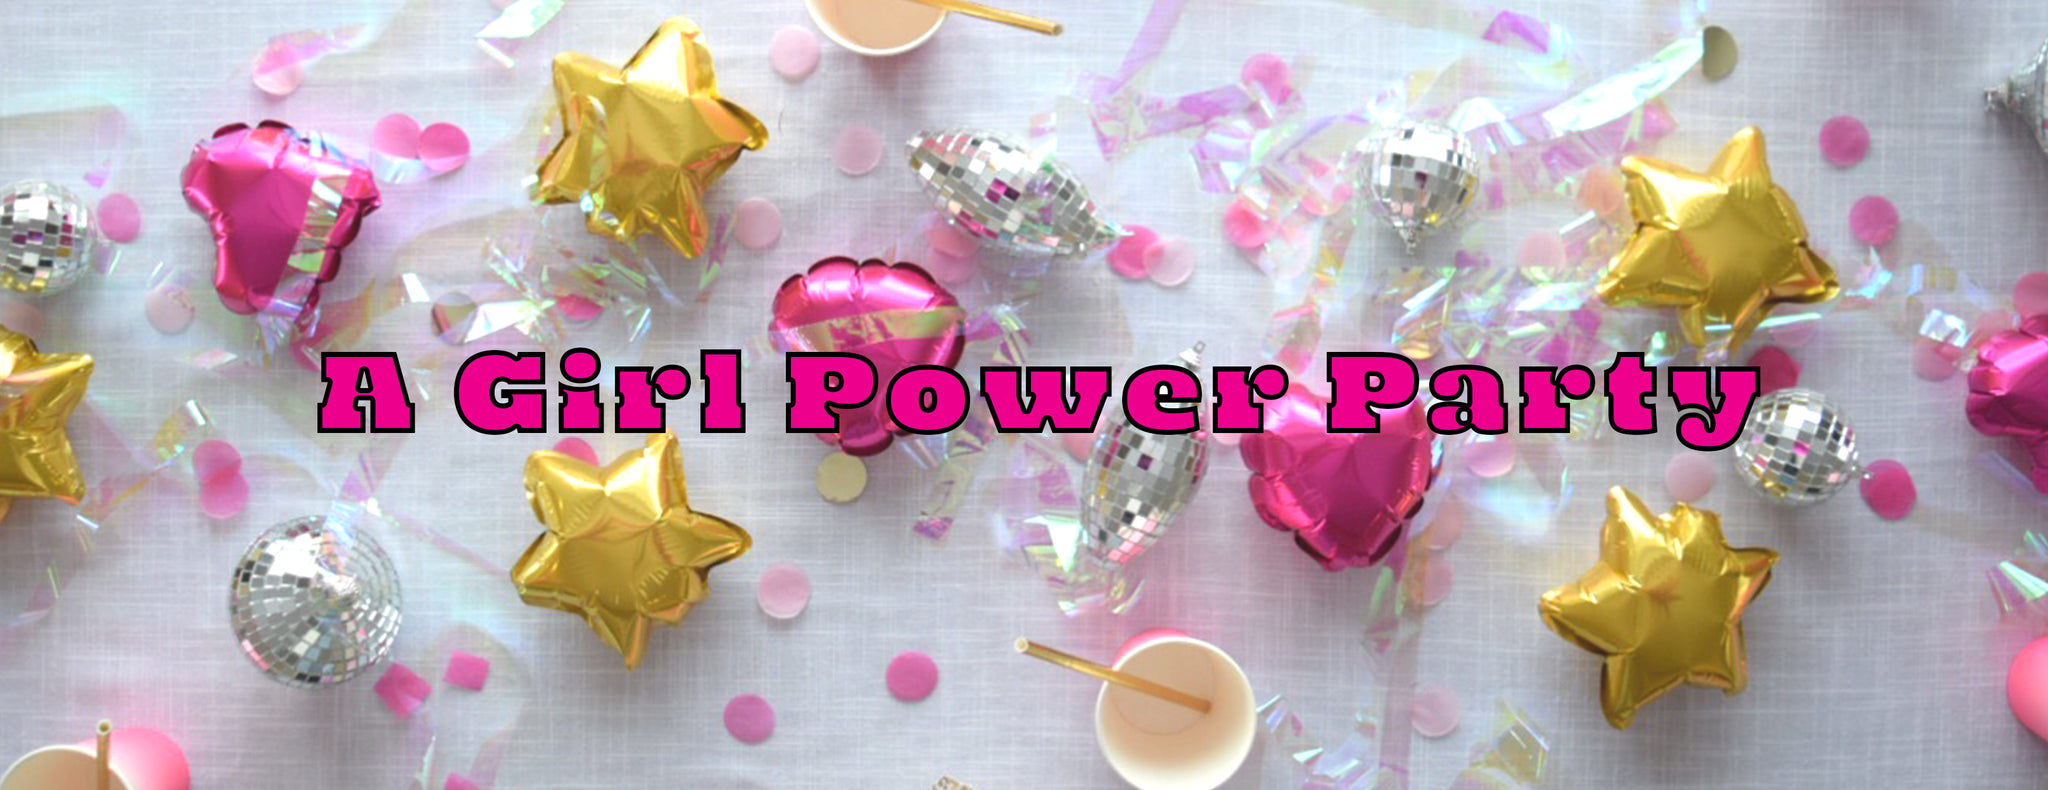 PARTY ET CIE EVENTS - A GIRL POWER PARTY